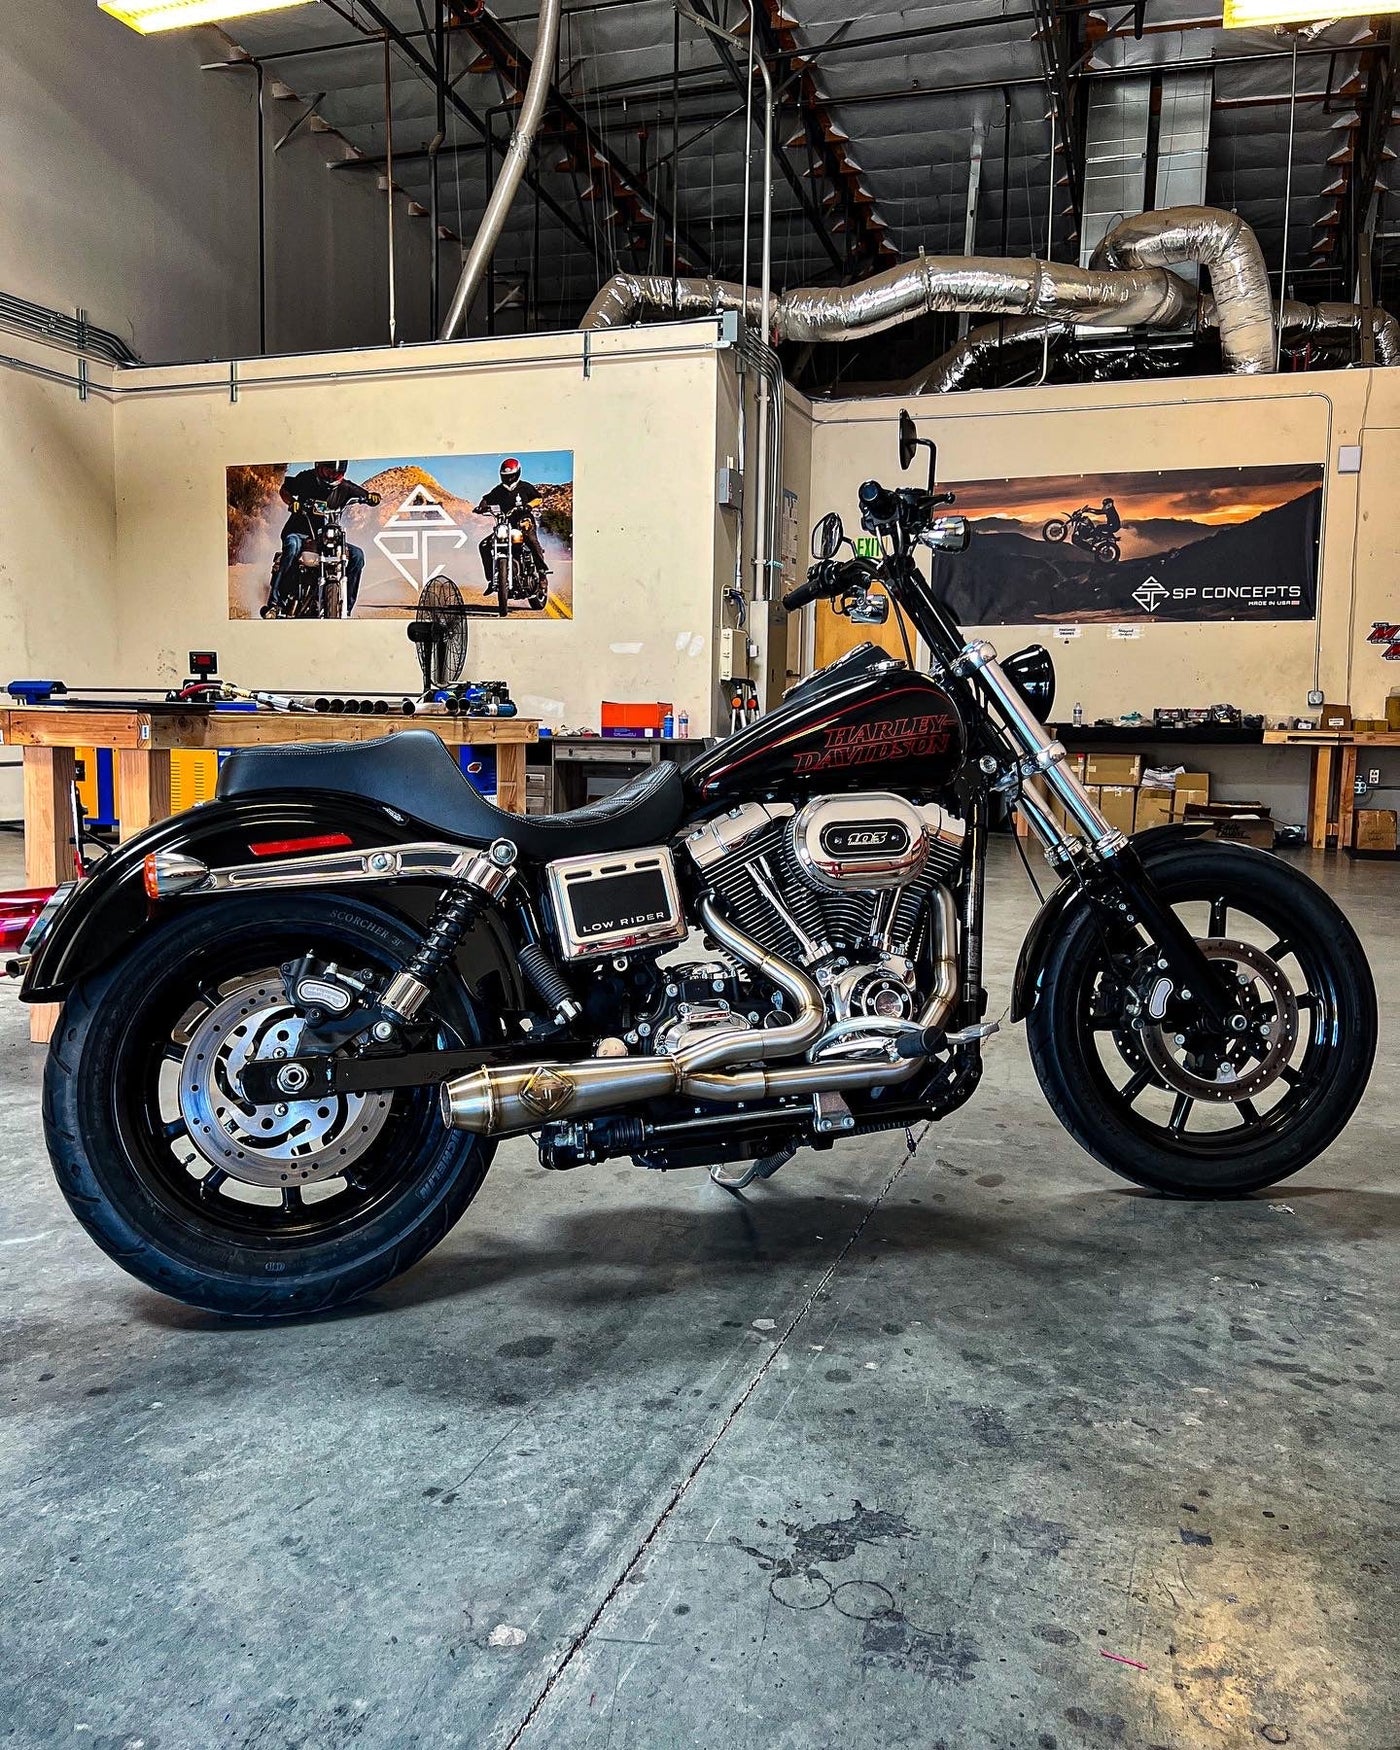 An SP Concepts Big Bore Exhaust 06-17 Dyna (stainless) motorcycle parked in a garage.